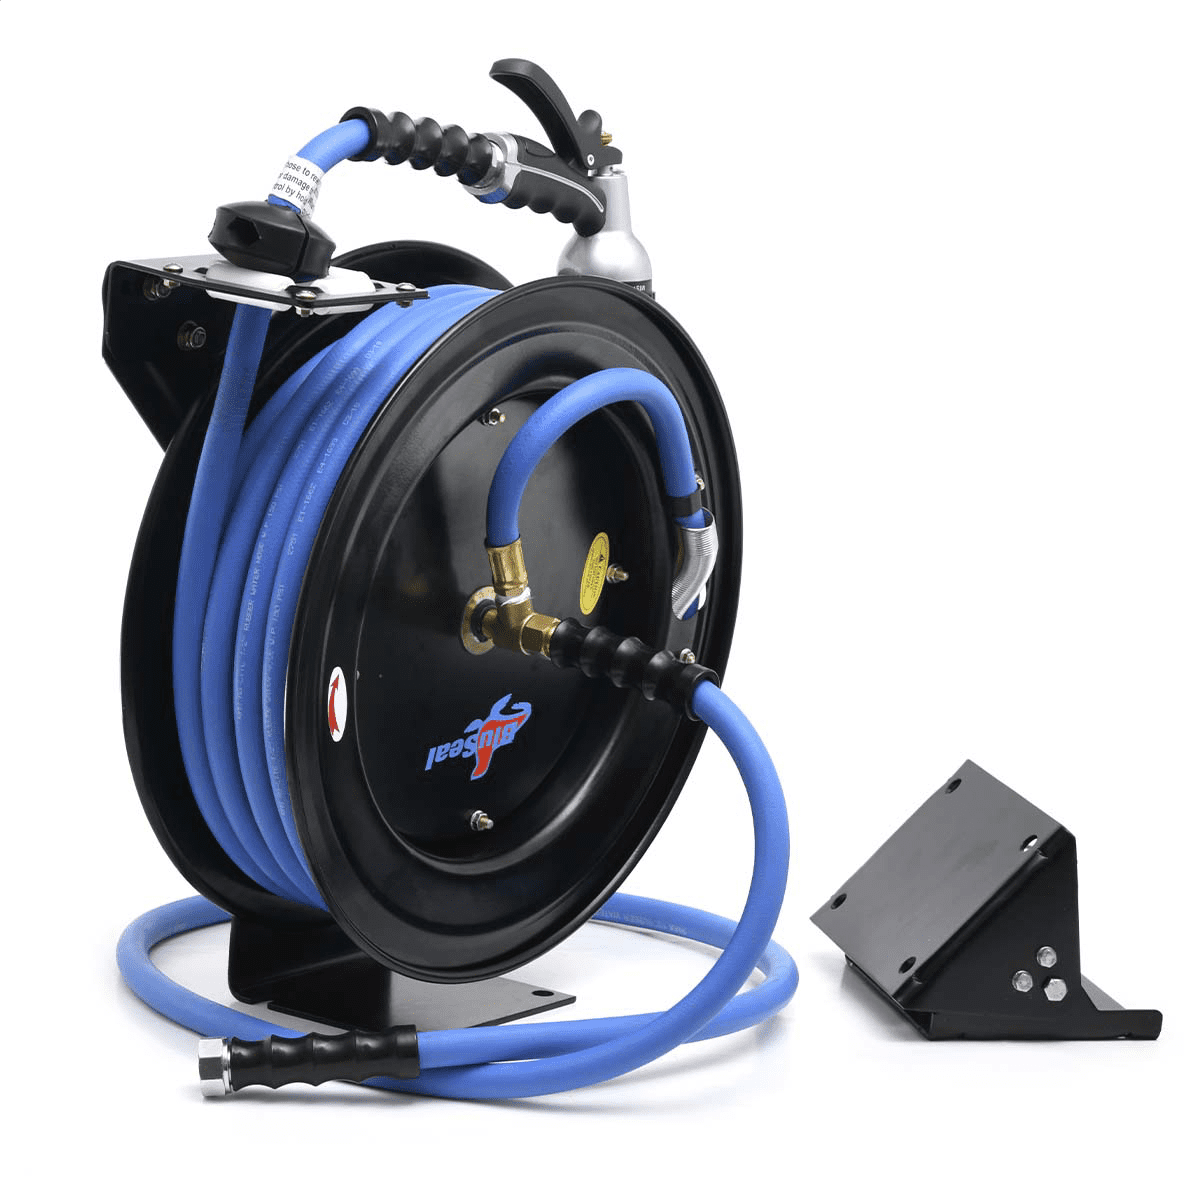 LNKOO 25FT Garden Hose Reel Wall Mount Expandable 3 Times TPE  Super-Strength High Pressure Flexible Water Hose with 3/4 Solid Fittings  Comes with Free Hose Hook 